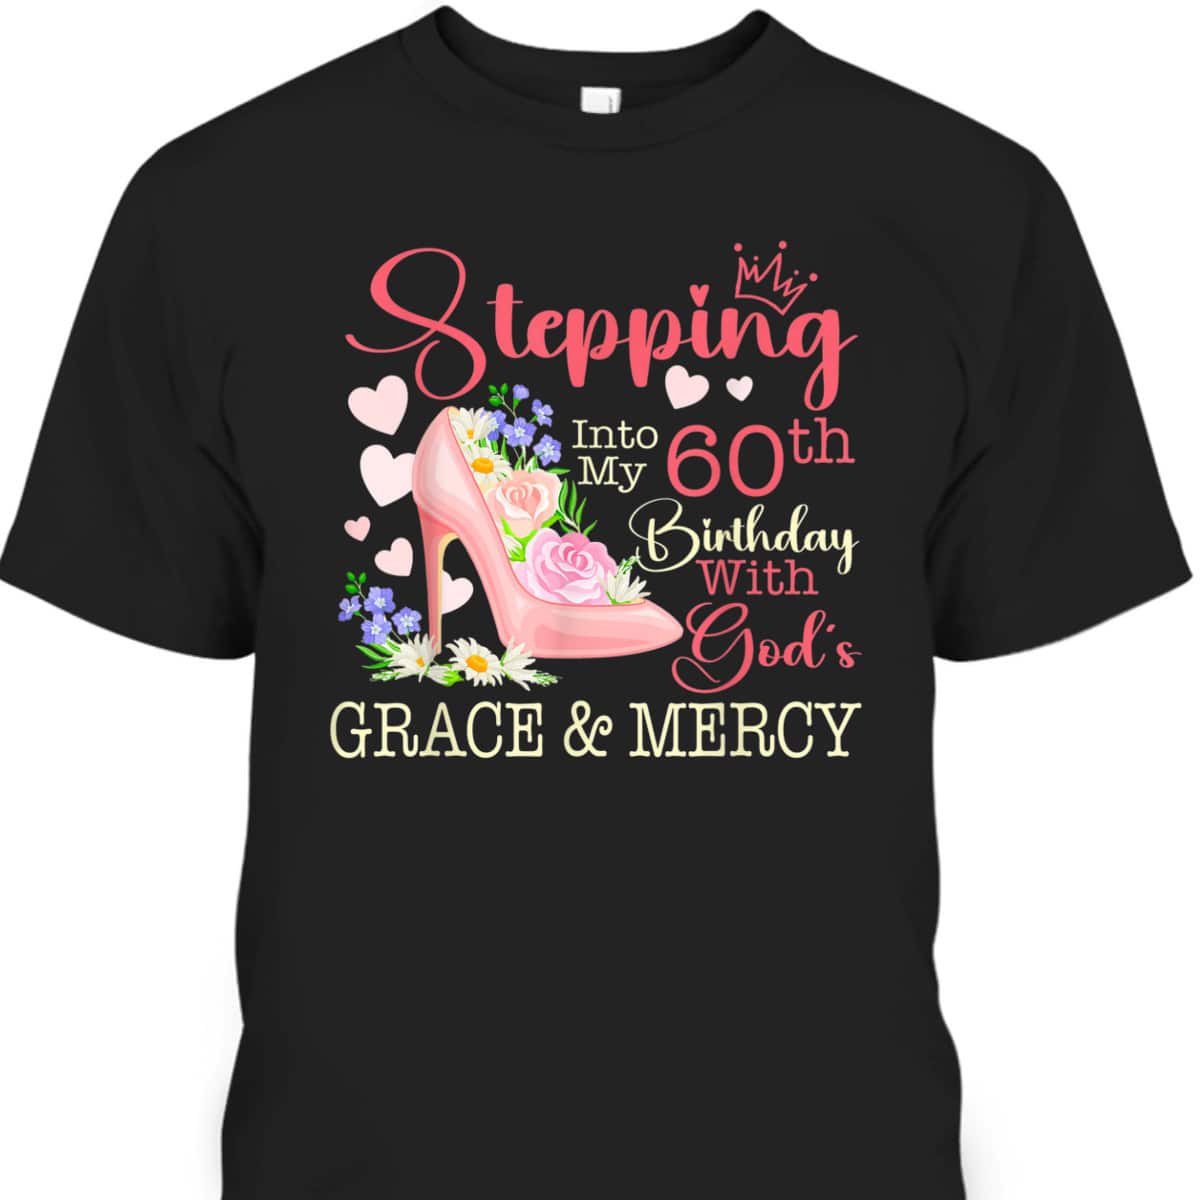 Stepping Into My 60th Birthday With God's Grace Mercy T-Shirt